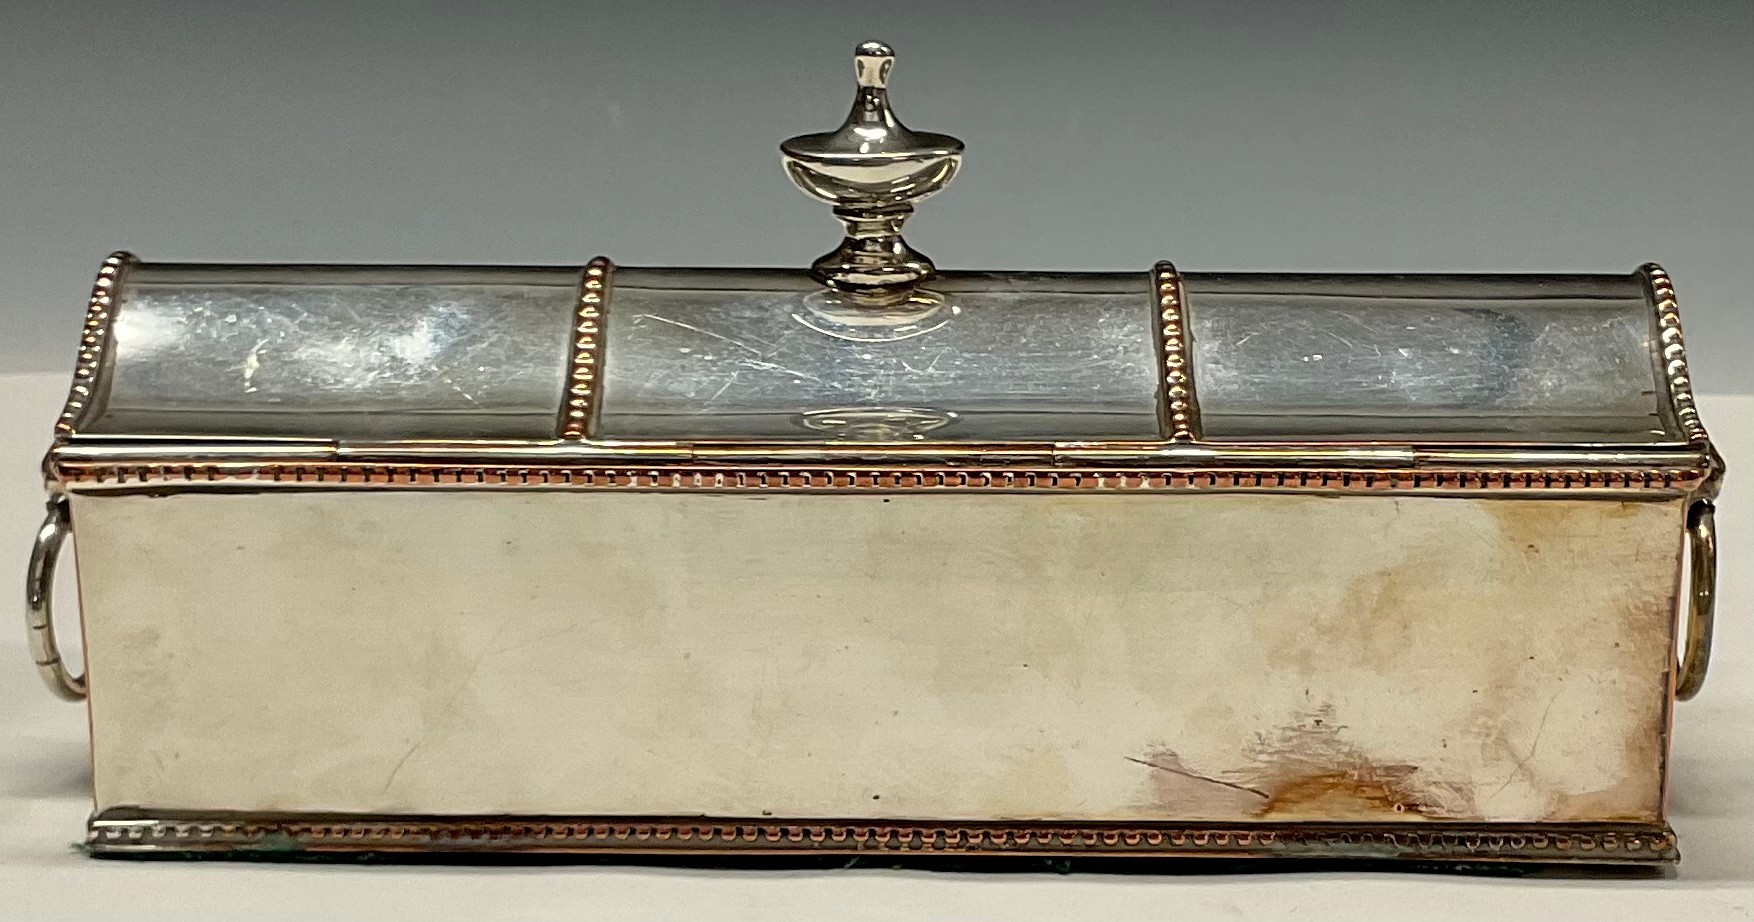 A George III Old Sheffield Plate treasury inkstand, hinged serpentine cover with urnular finial, - Image 5 of 7